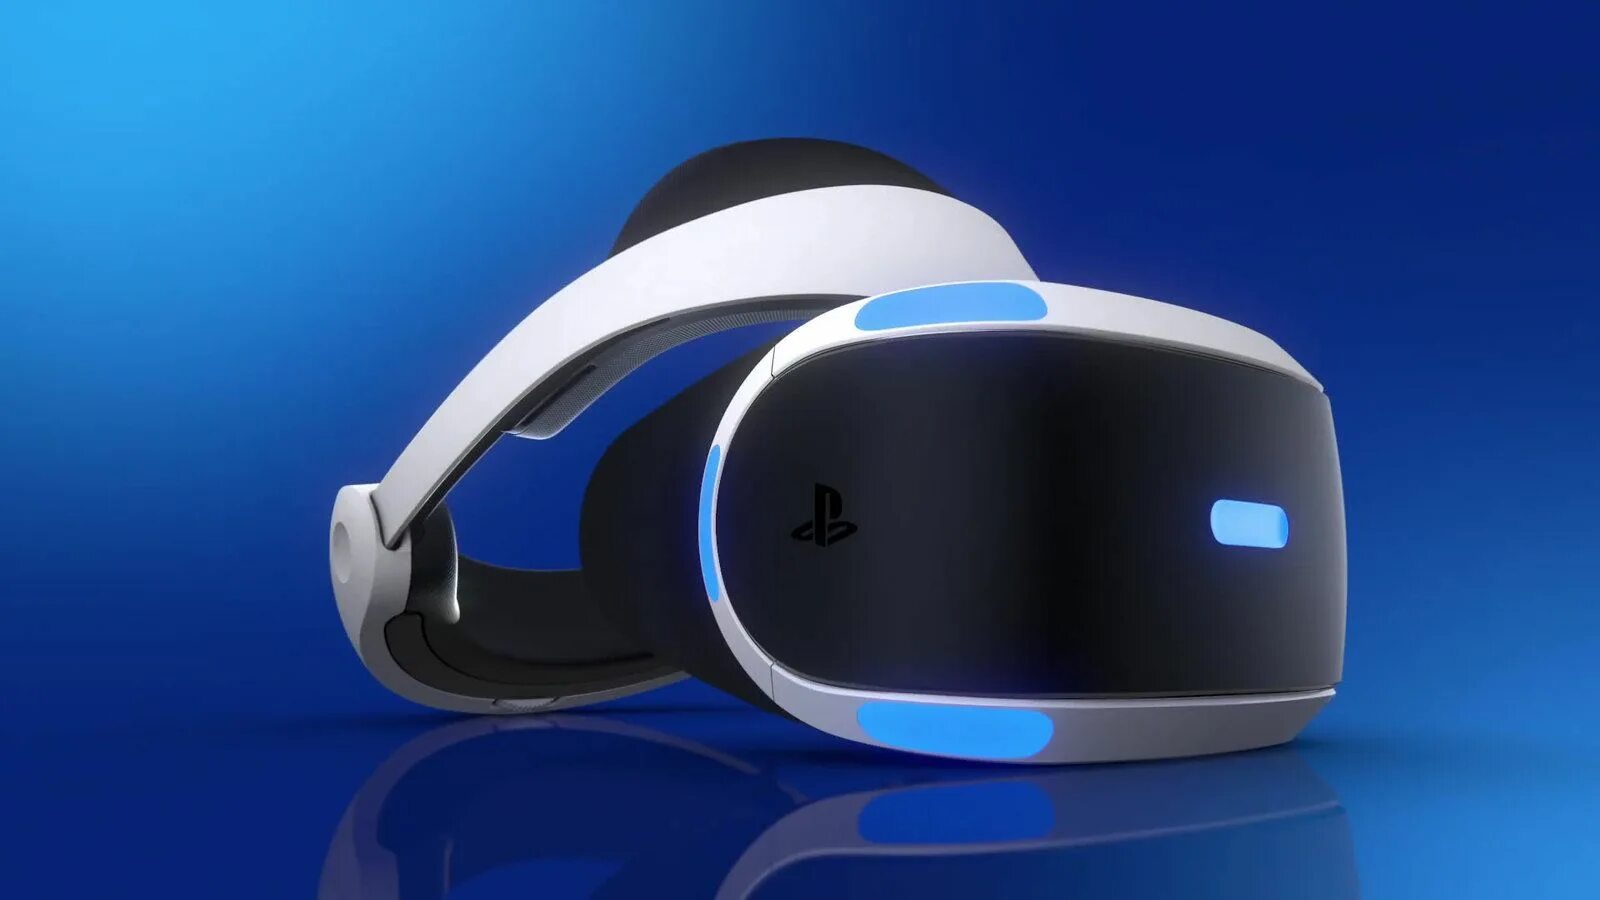 VR Sony PLAYSTATION vr2. Sony PS VR 2. VR шлем - PLAYSTATION VR,. Шлем Sony PLAYSTATION VR 2. Очки реальности ps4